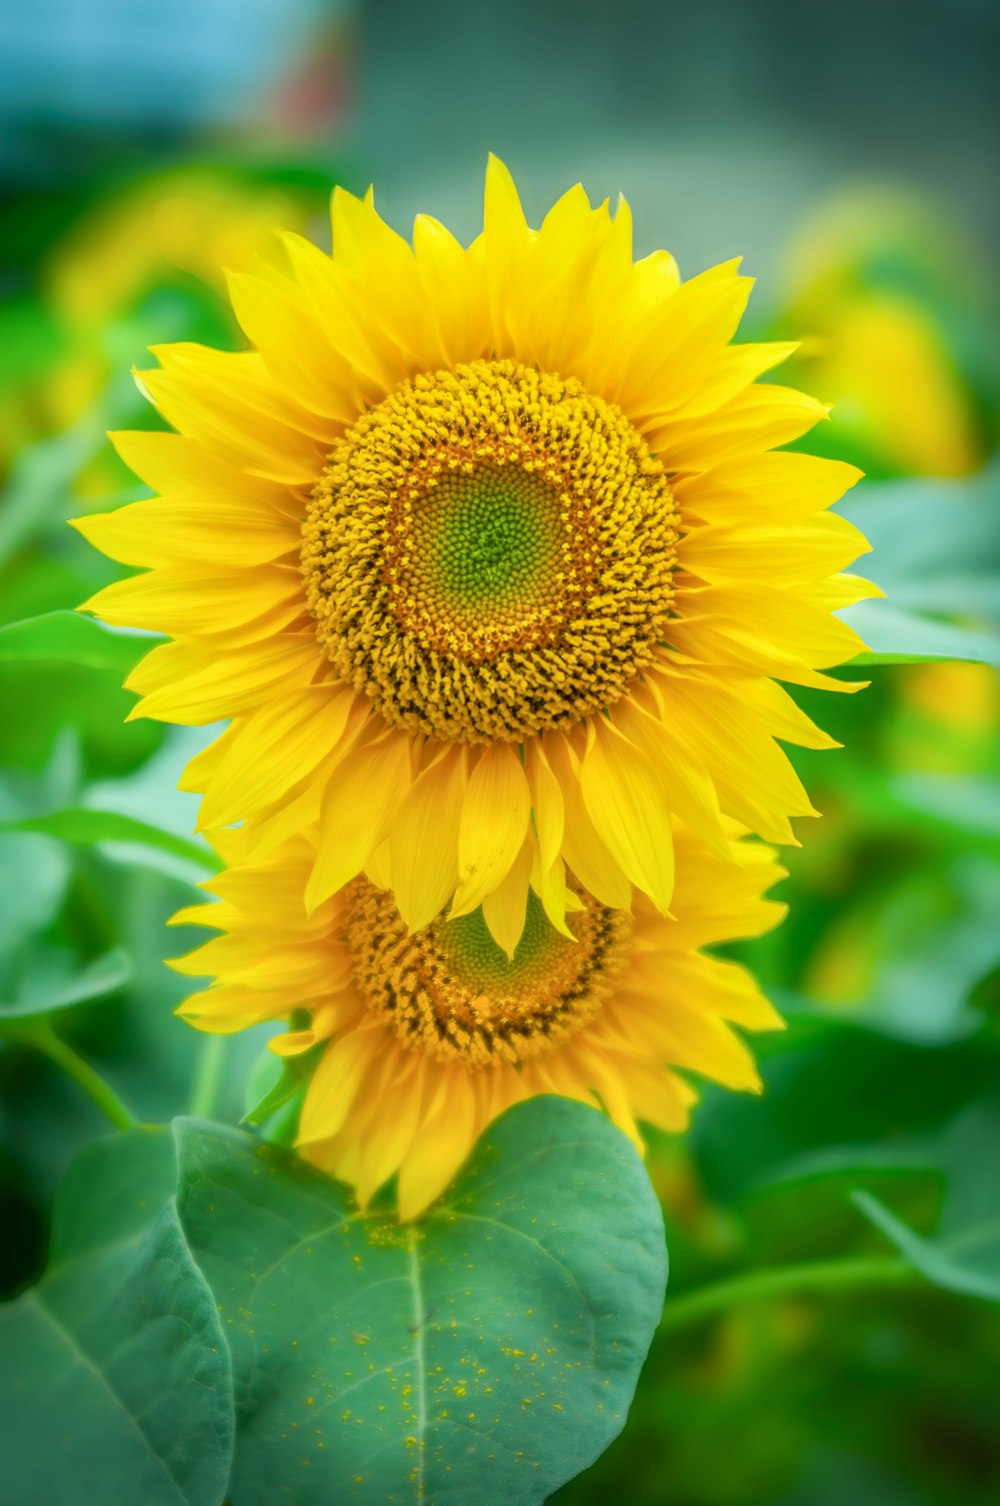 a large yellow sunflower in a field of green leaves